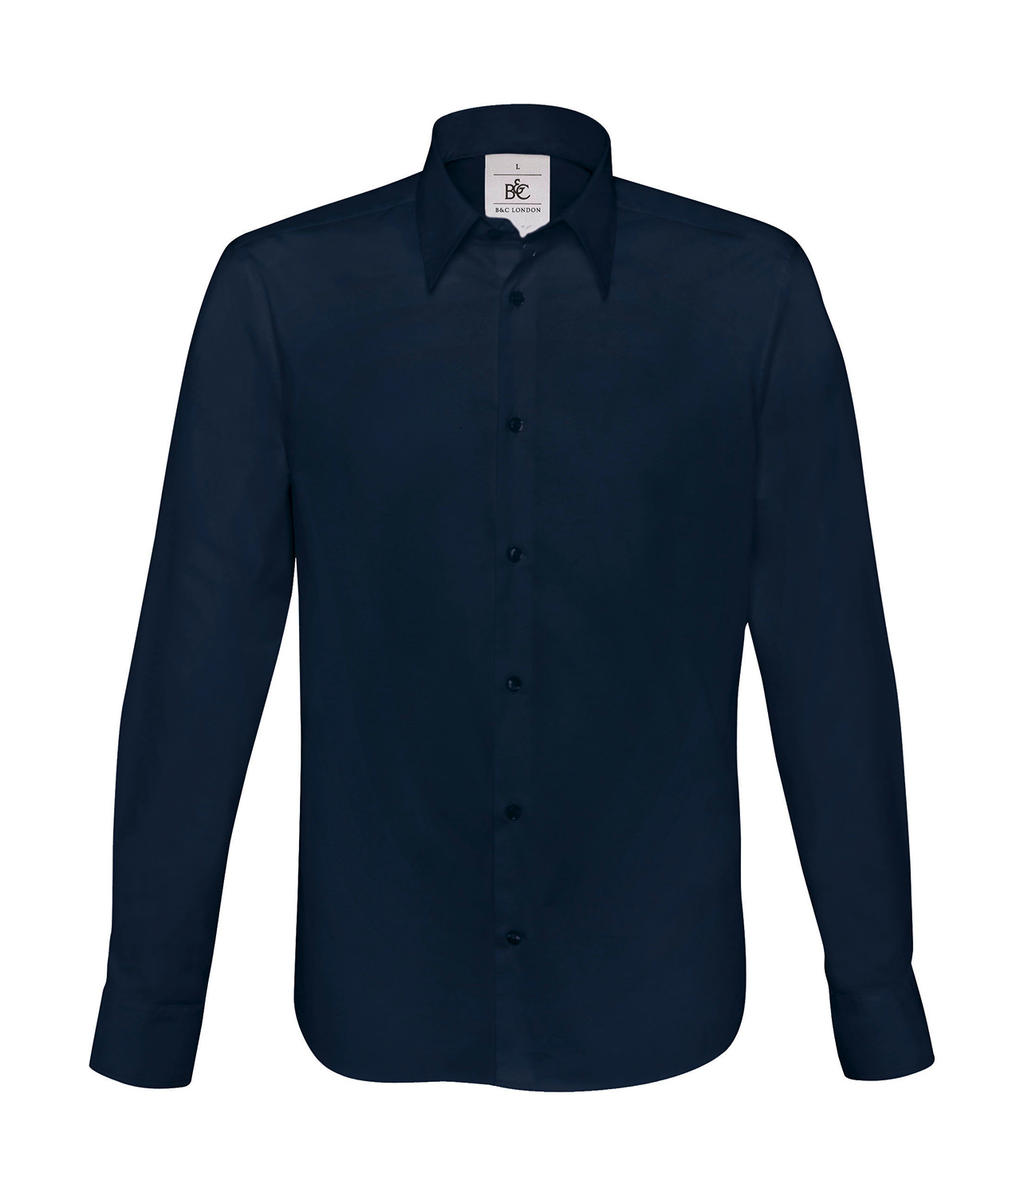  London Stretch Shirt LS in Farbe Navy